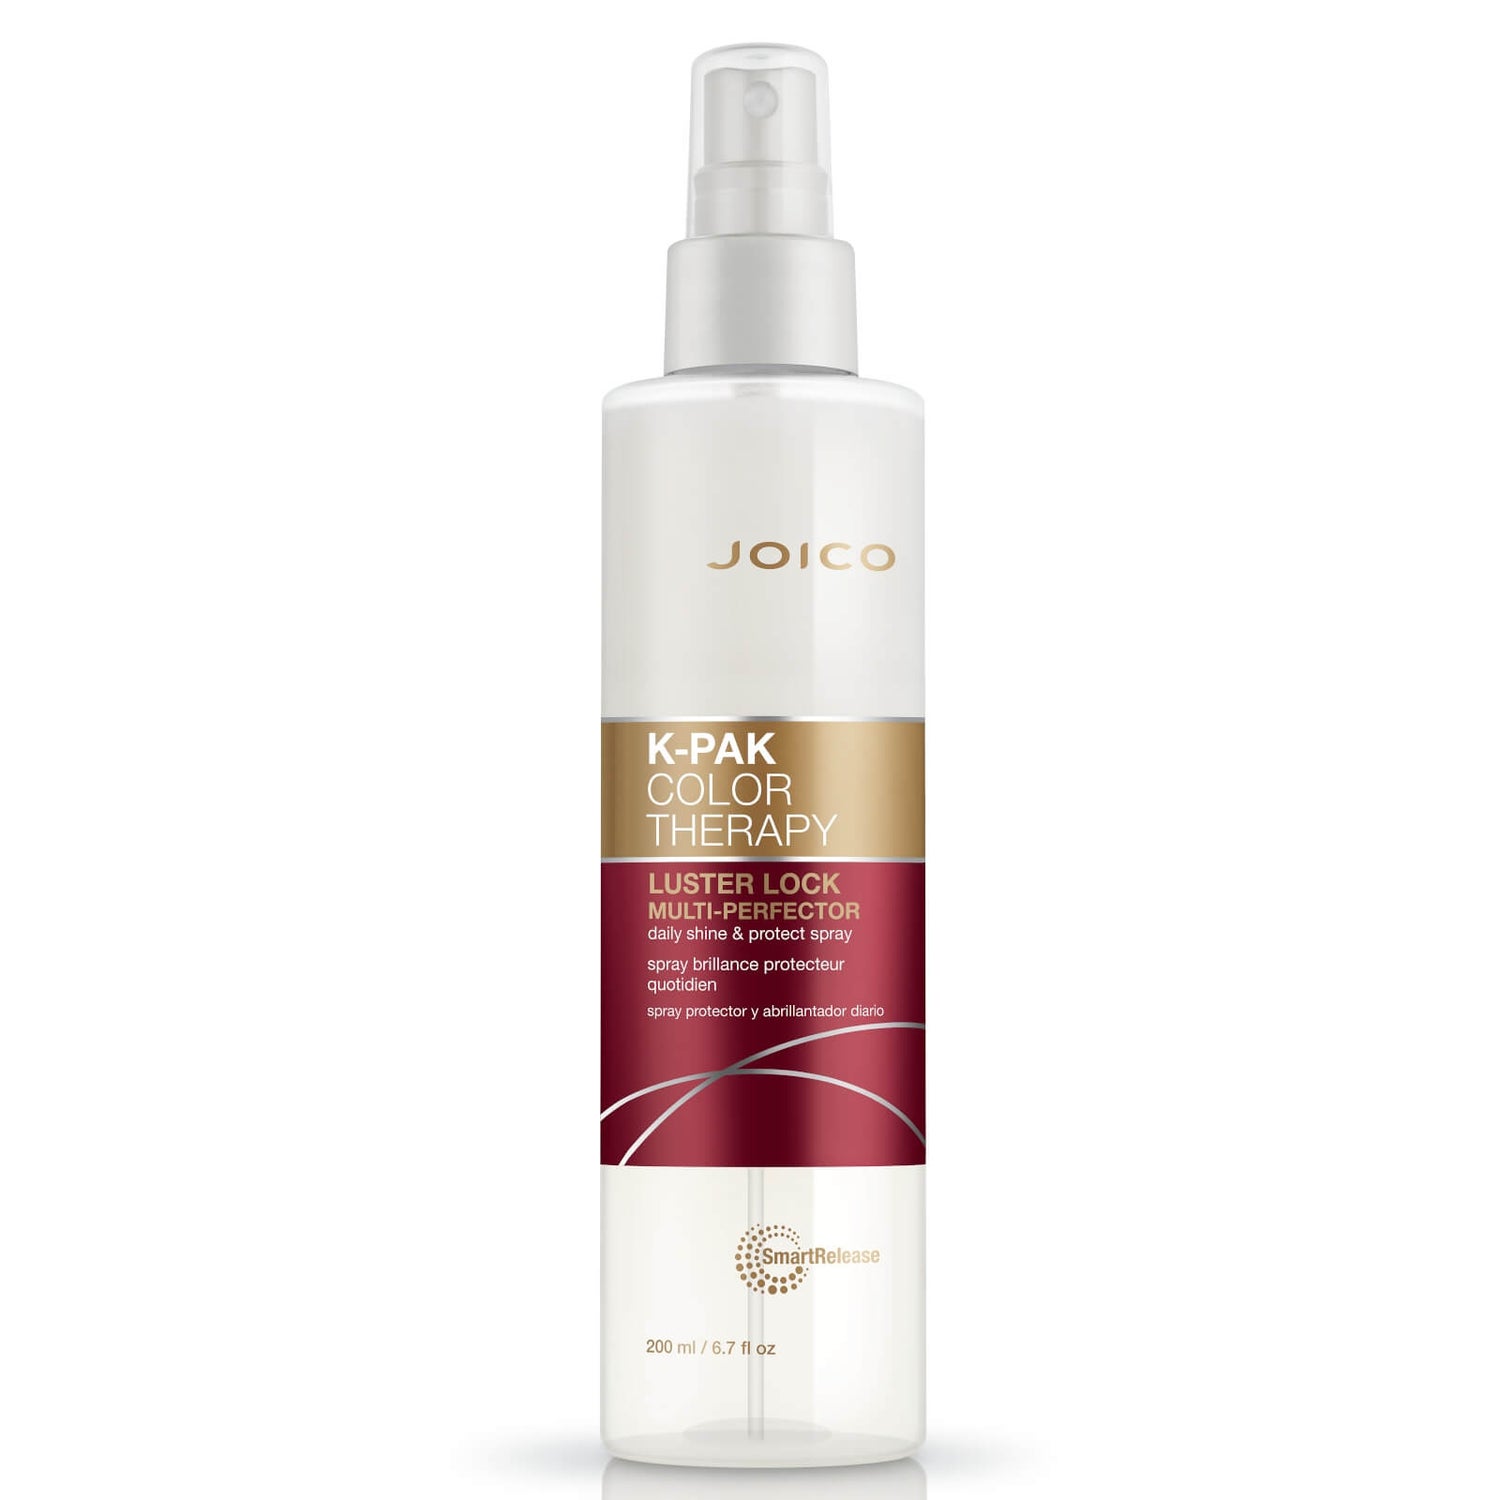 Joico K-Pak Color Therapy Luster Lock Multi-Perfector Daily Shine and Protect Spray 200 ml